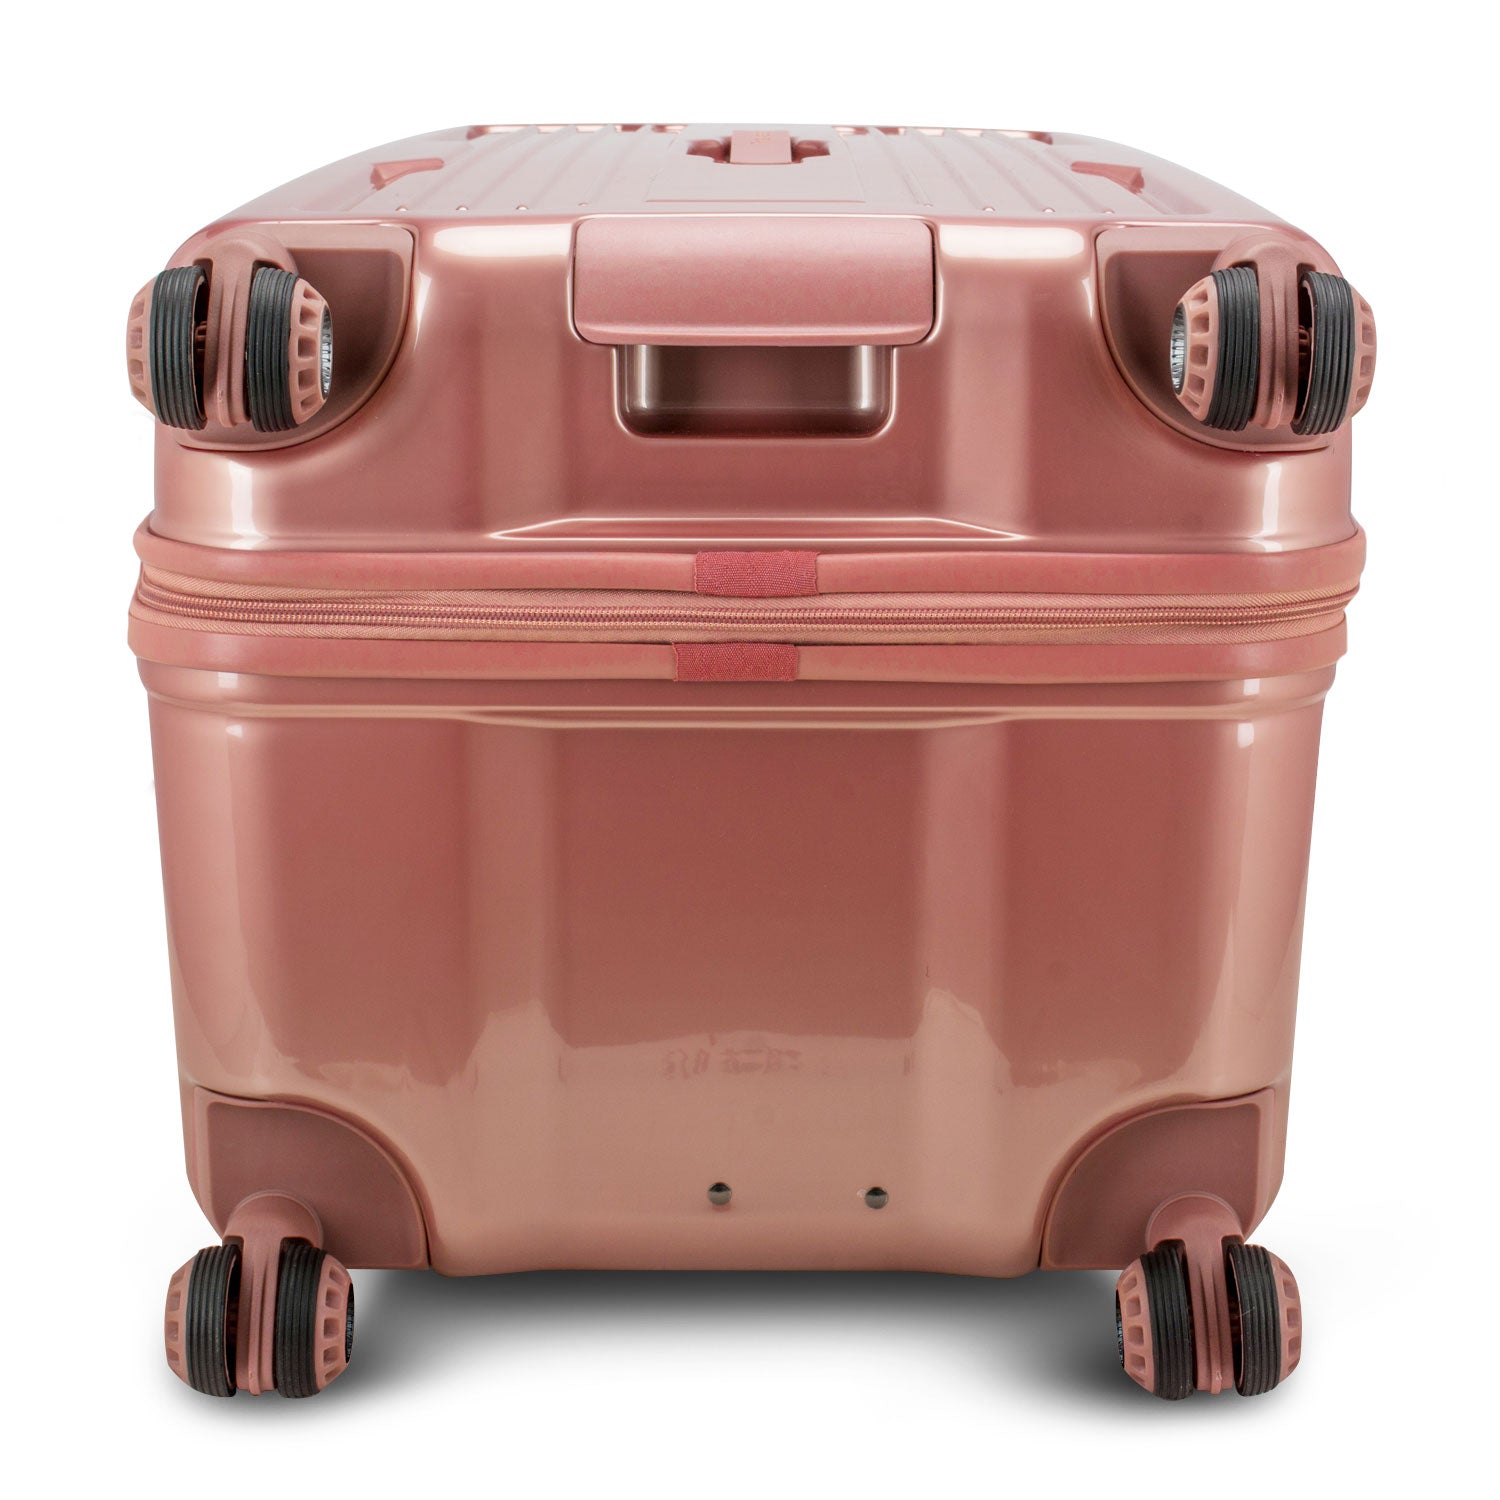 Ultimax II Large Trunk Spinner Luggage's 4 spinner wheels